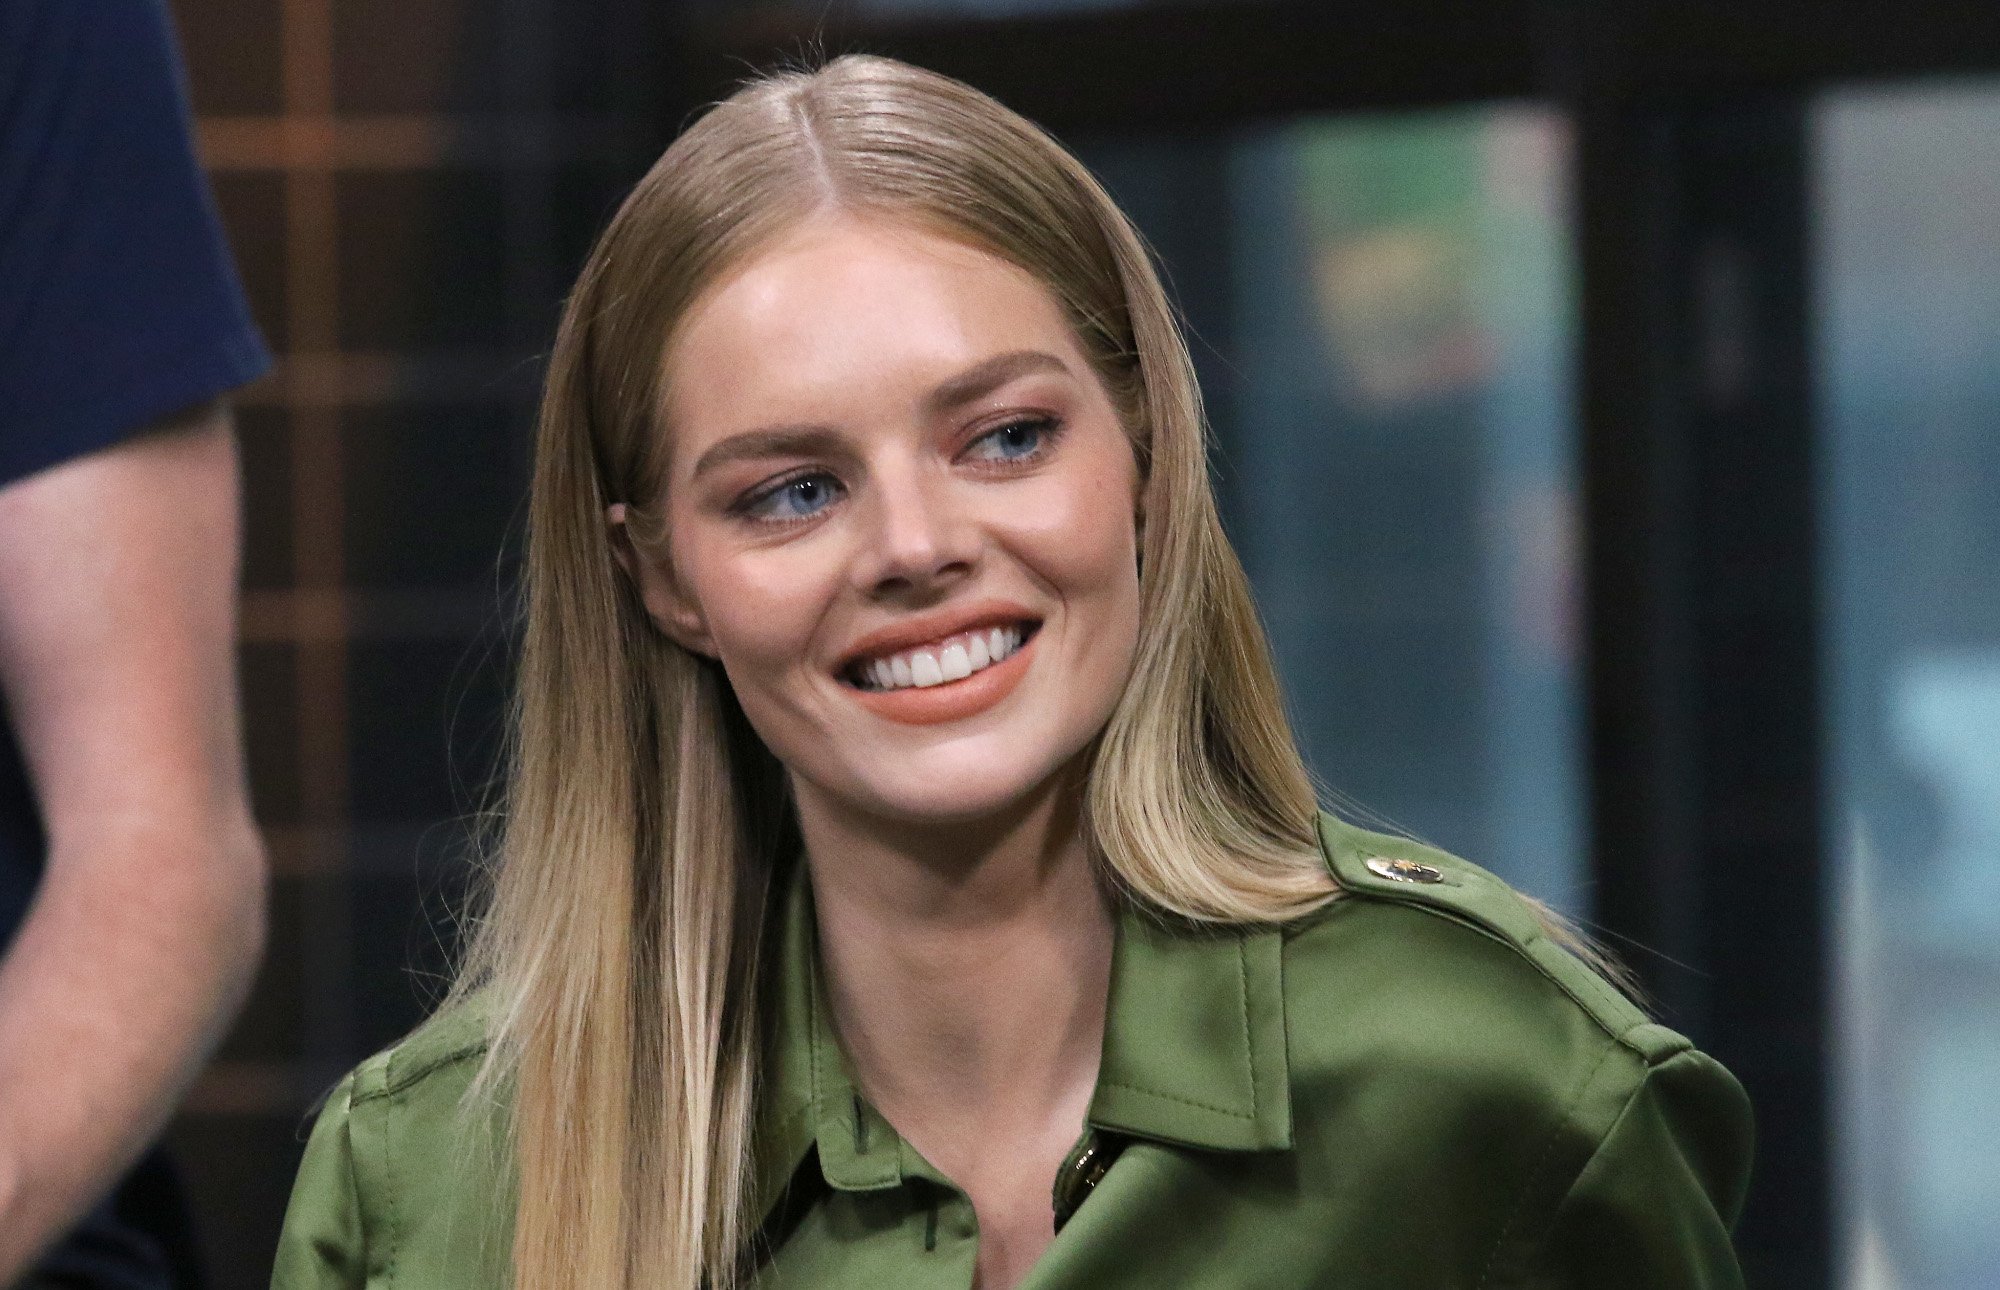 'Nine Perfect Strangers' star Samara Weaving. She's wearing a green button-up blouse and looking to the left of the camera. She's smiling.